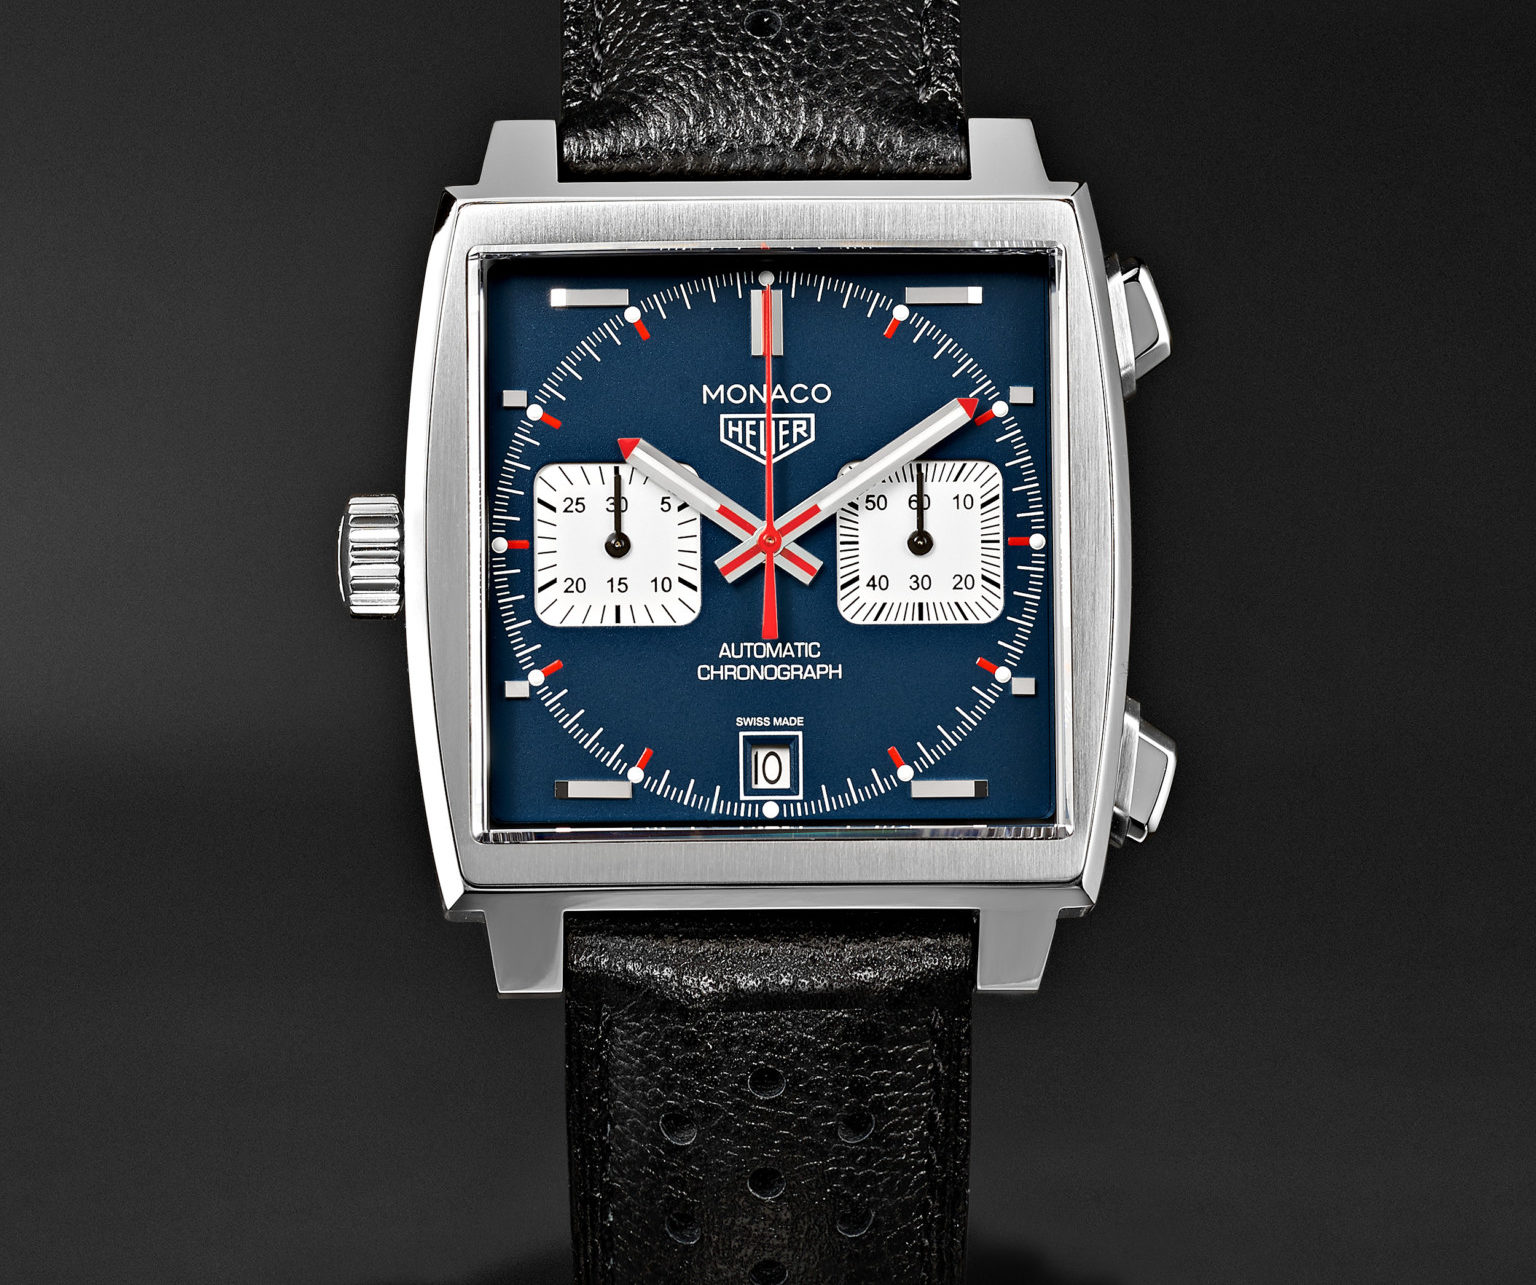 Tag heuer monaco matt blue dial chronograph automatic 39mm black perforated leather strap e1511259887381